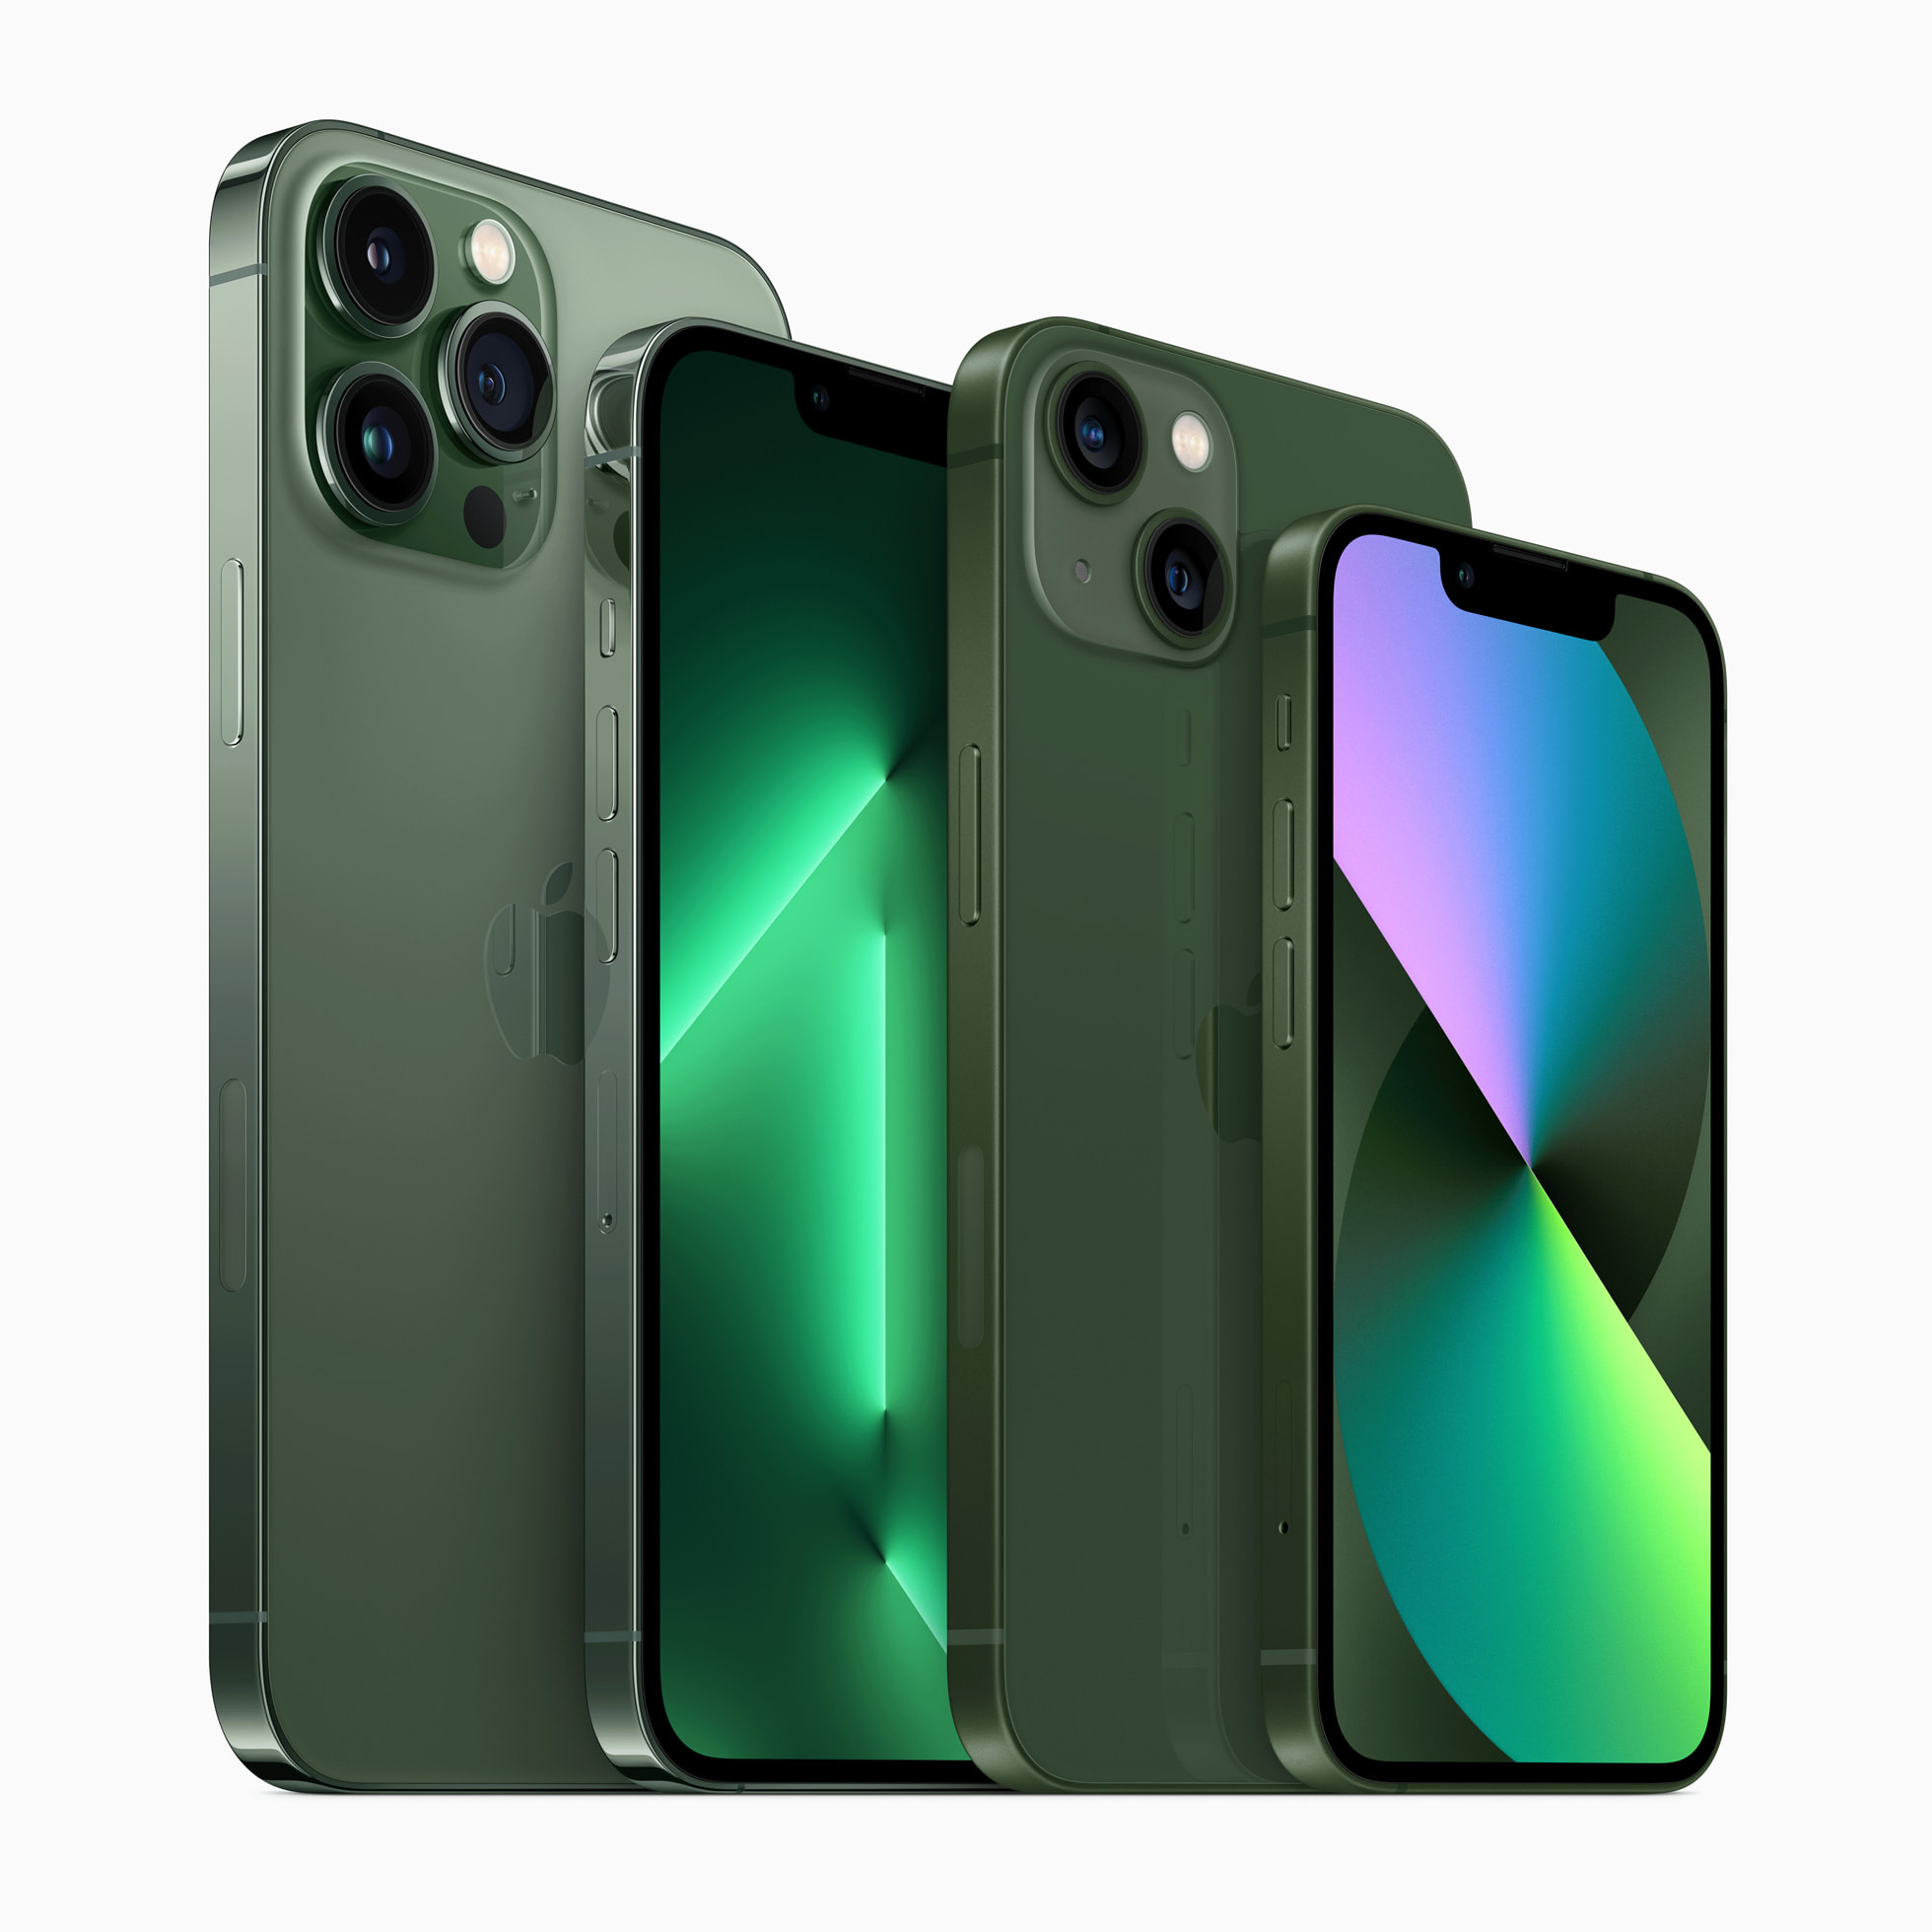 Apple's iPhone 13 Pro in Alpine Green: Hands on